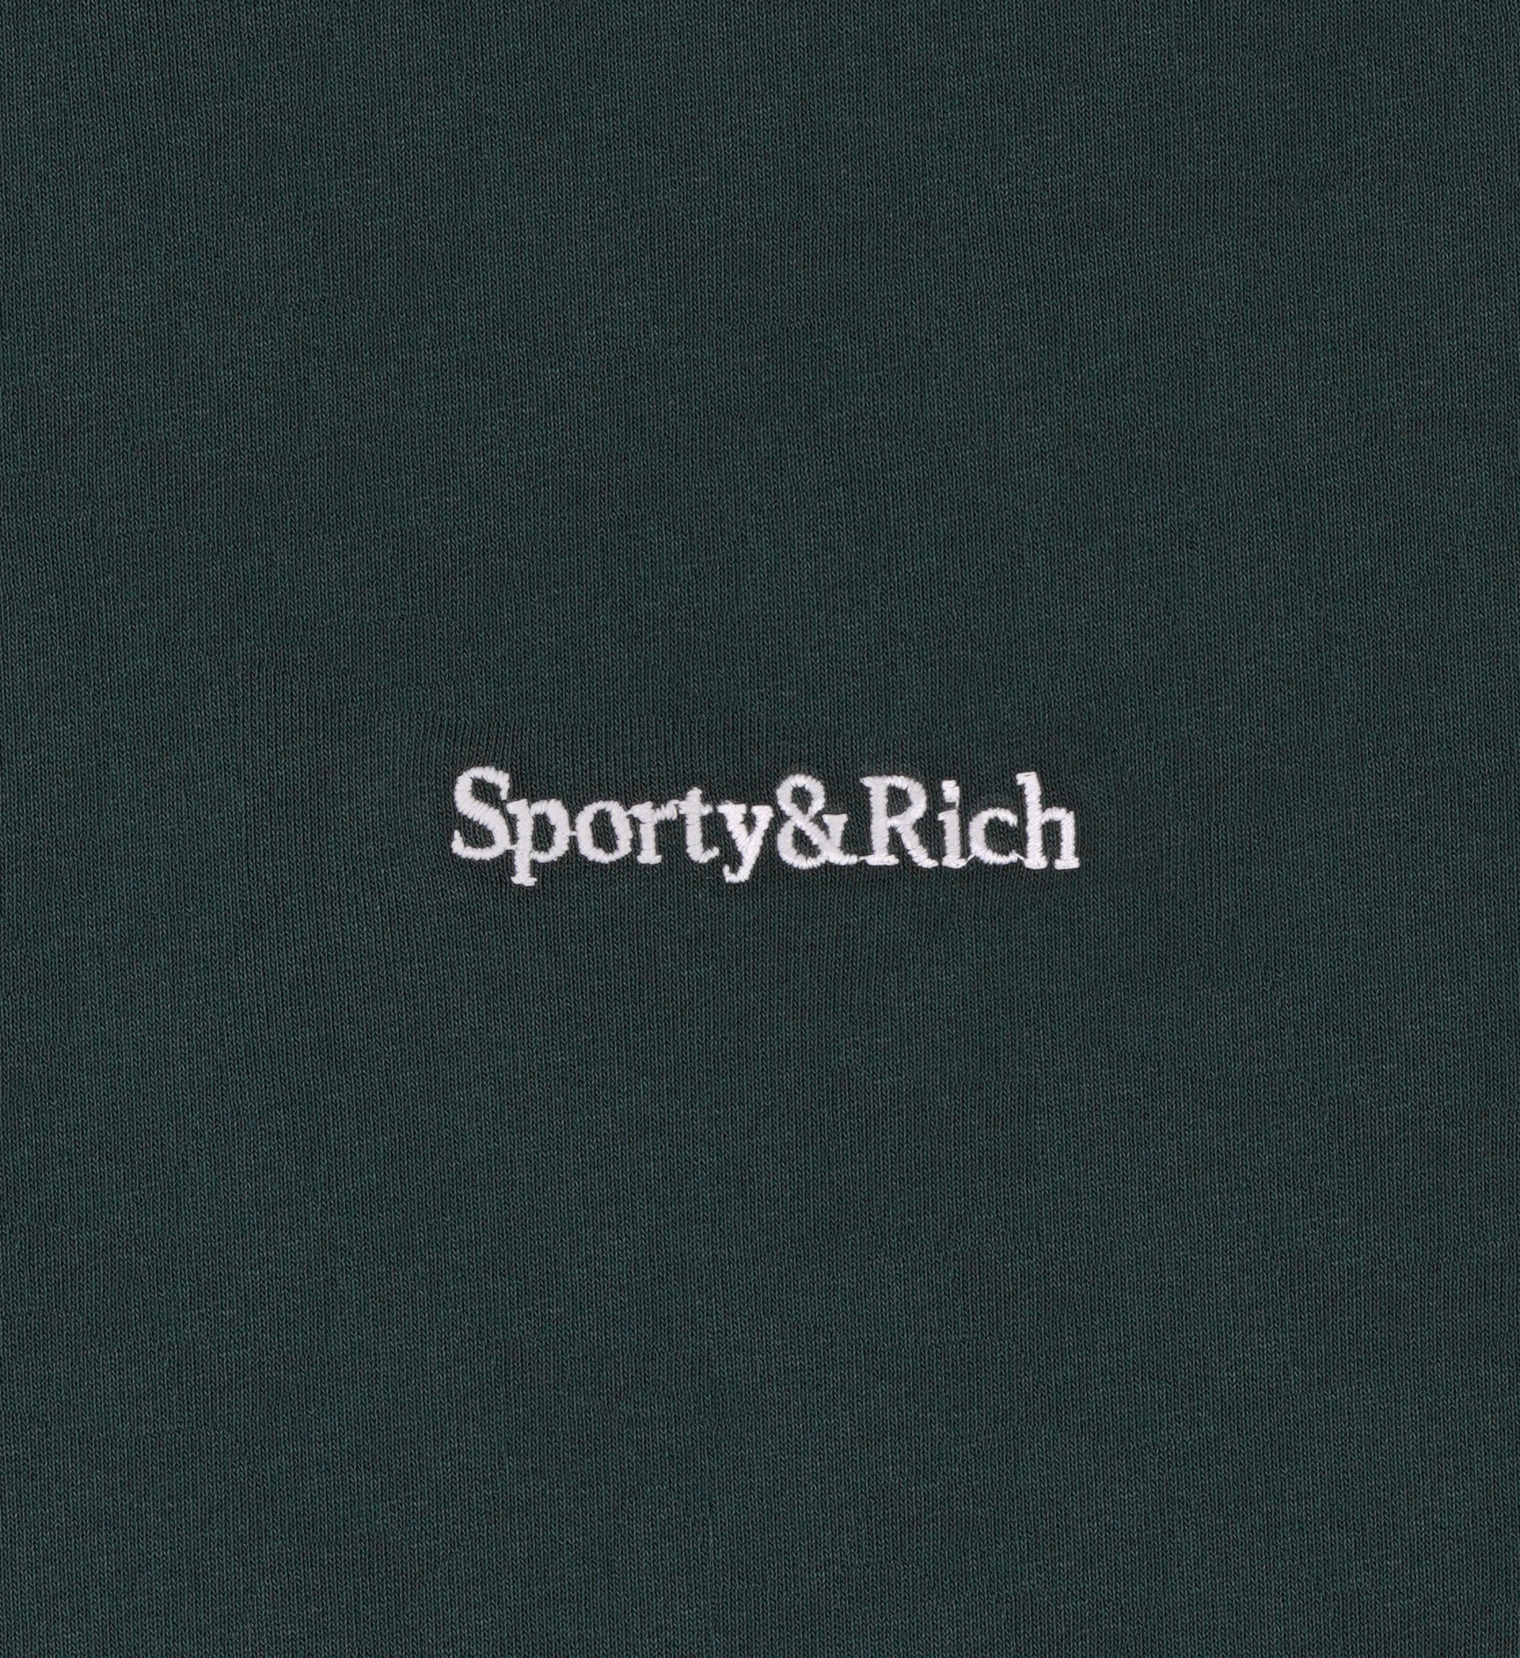 SPORTY & RICH Logo embroidered sweatpants